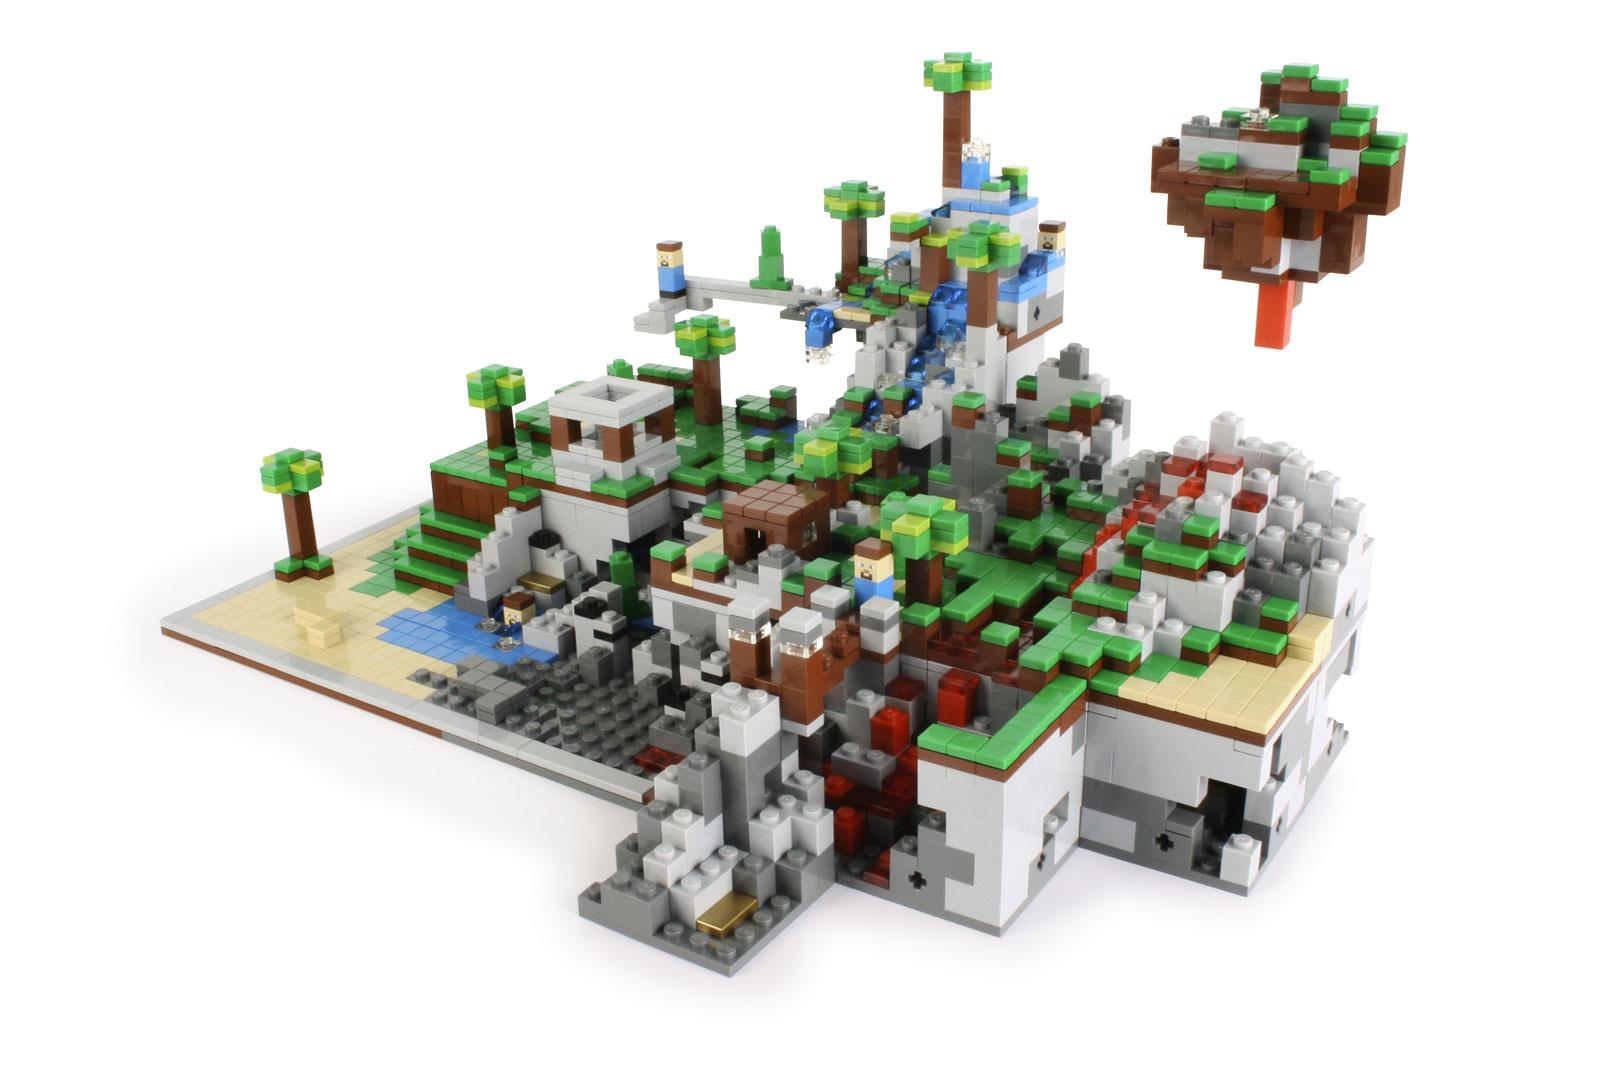 What you can do with 6 Lego Minecraft sets